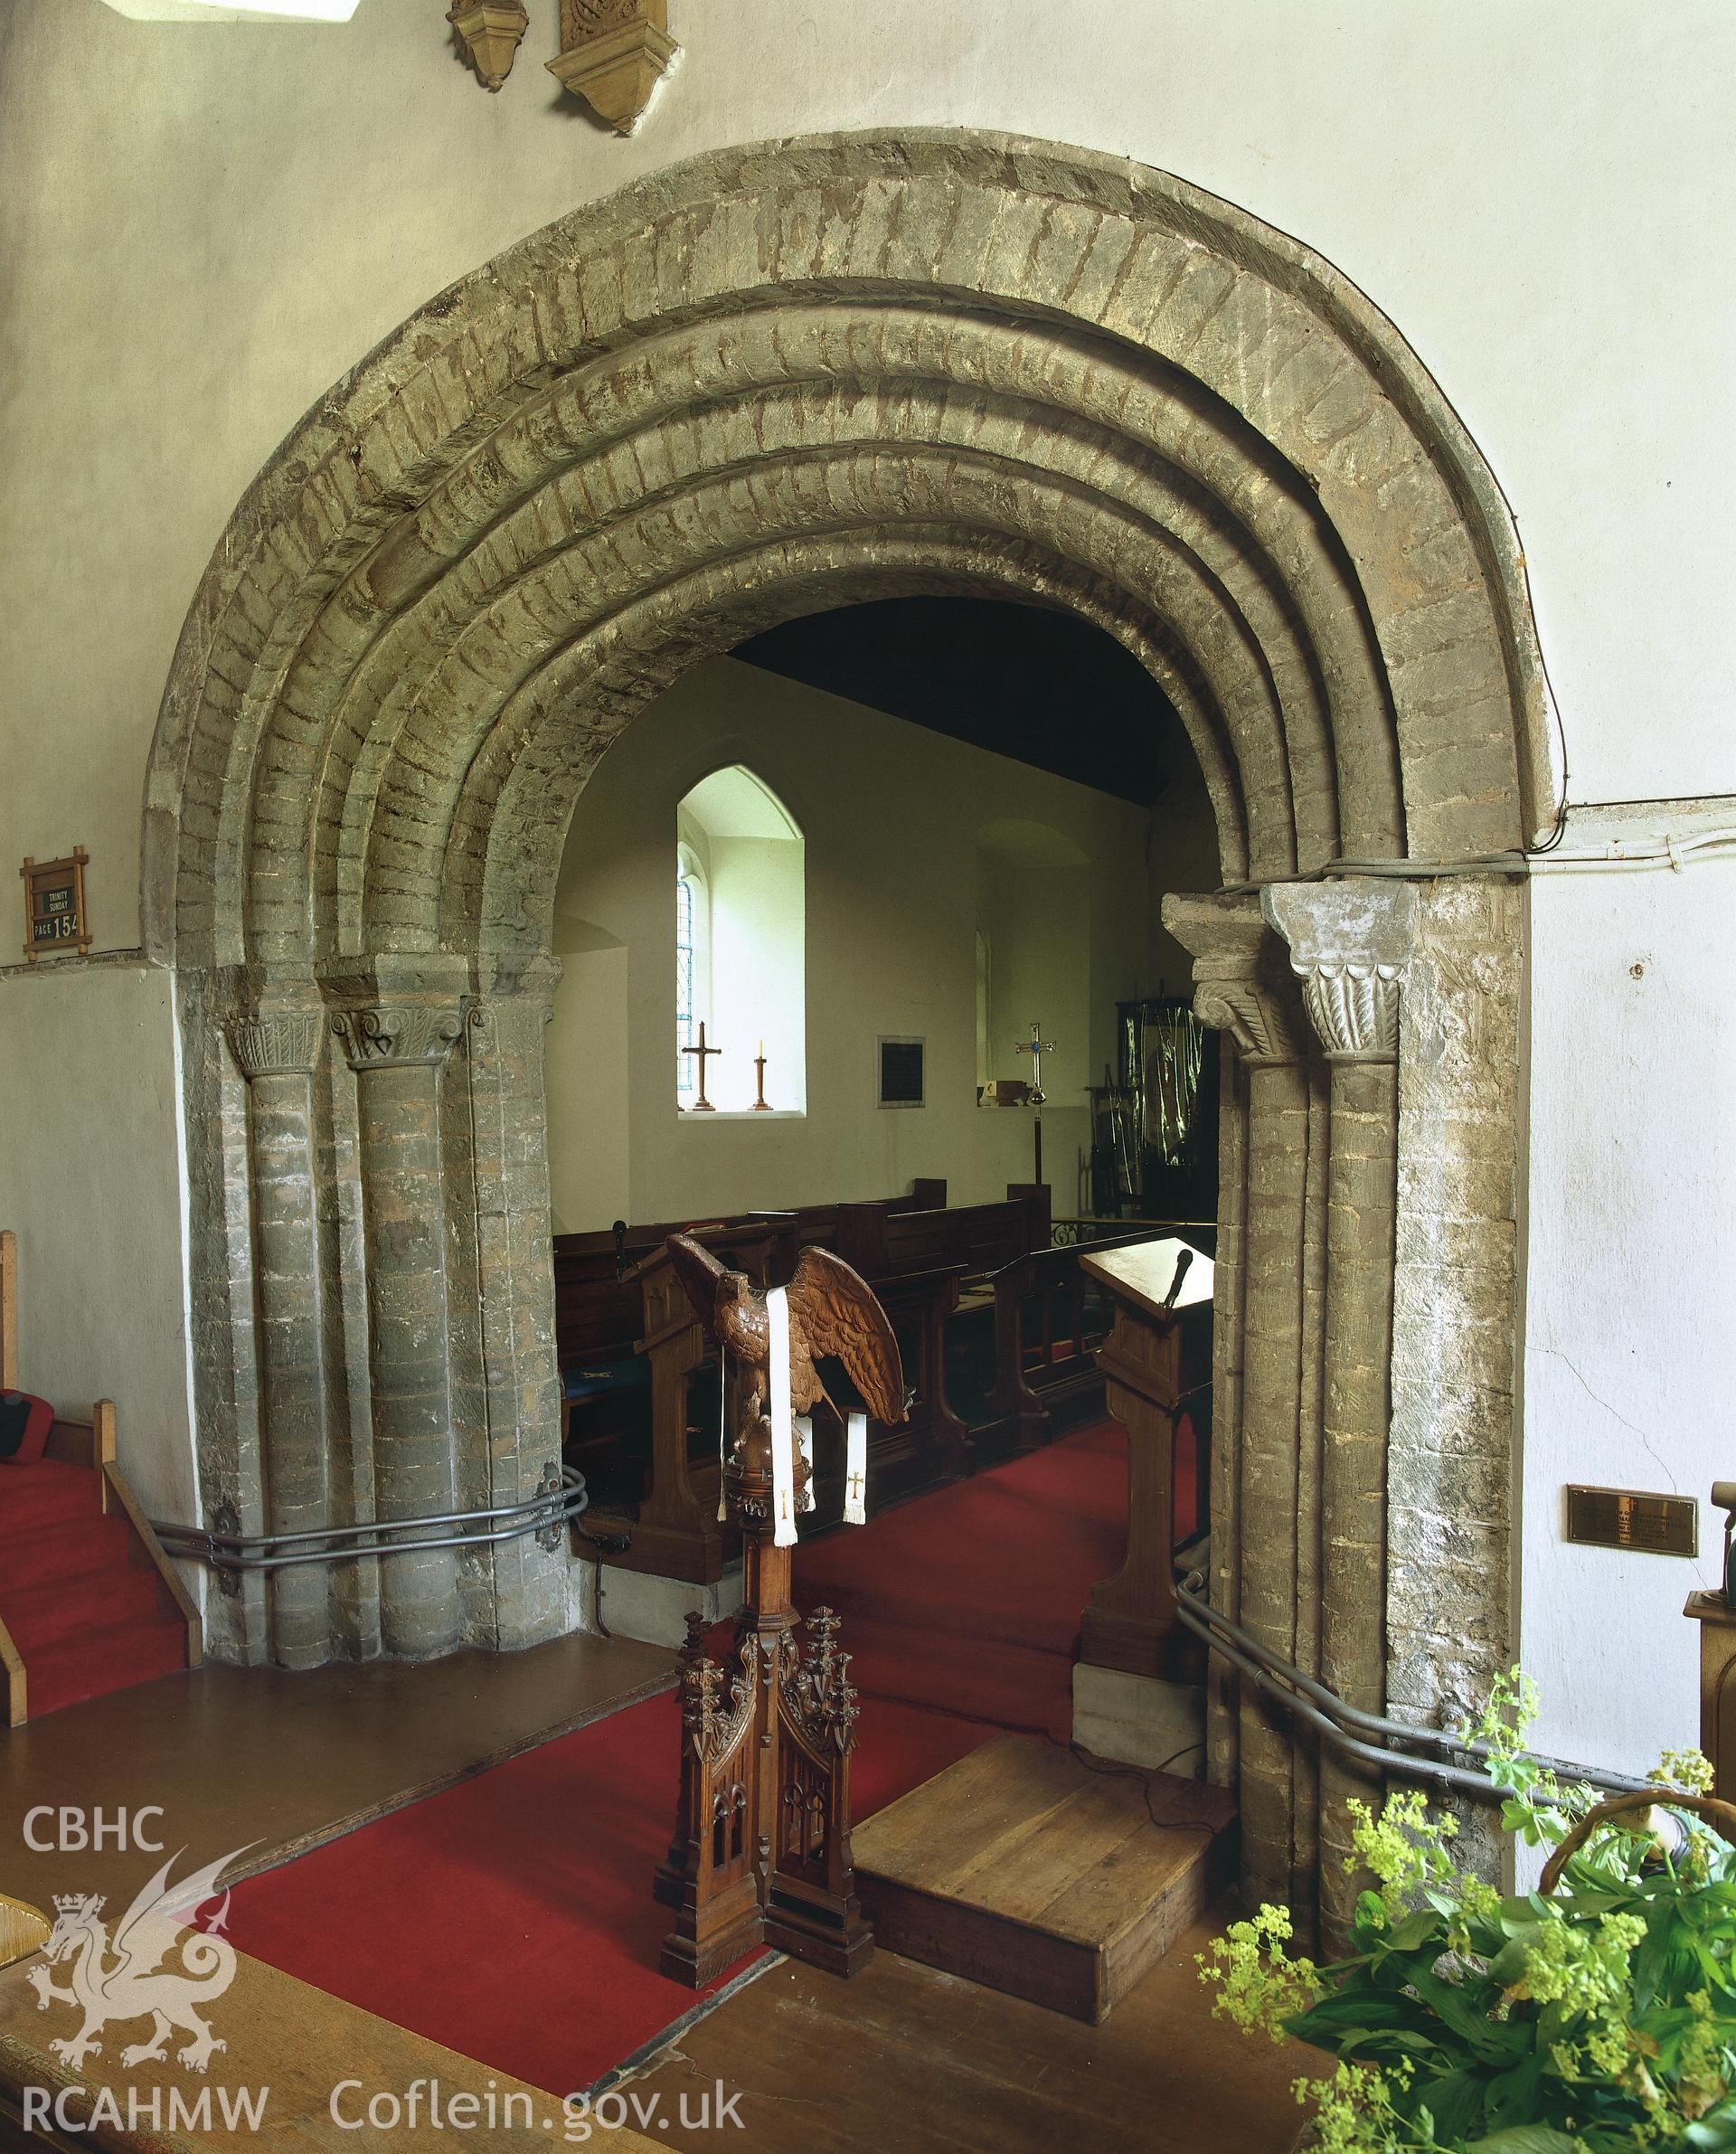 RCAHMW colour transparency showing view of the chancel arch at  St Mary Magdalane's Church, St Clears.